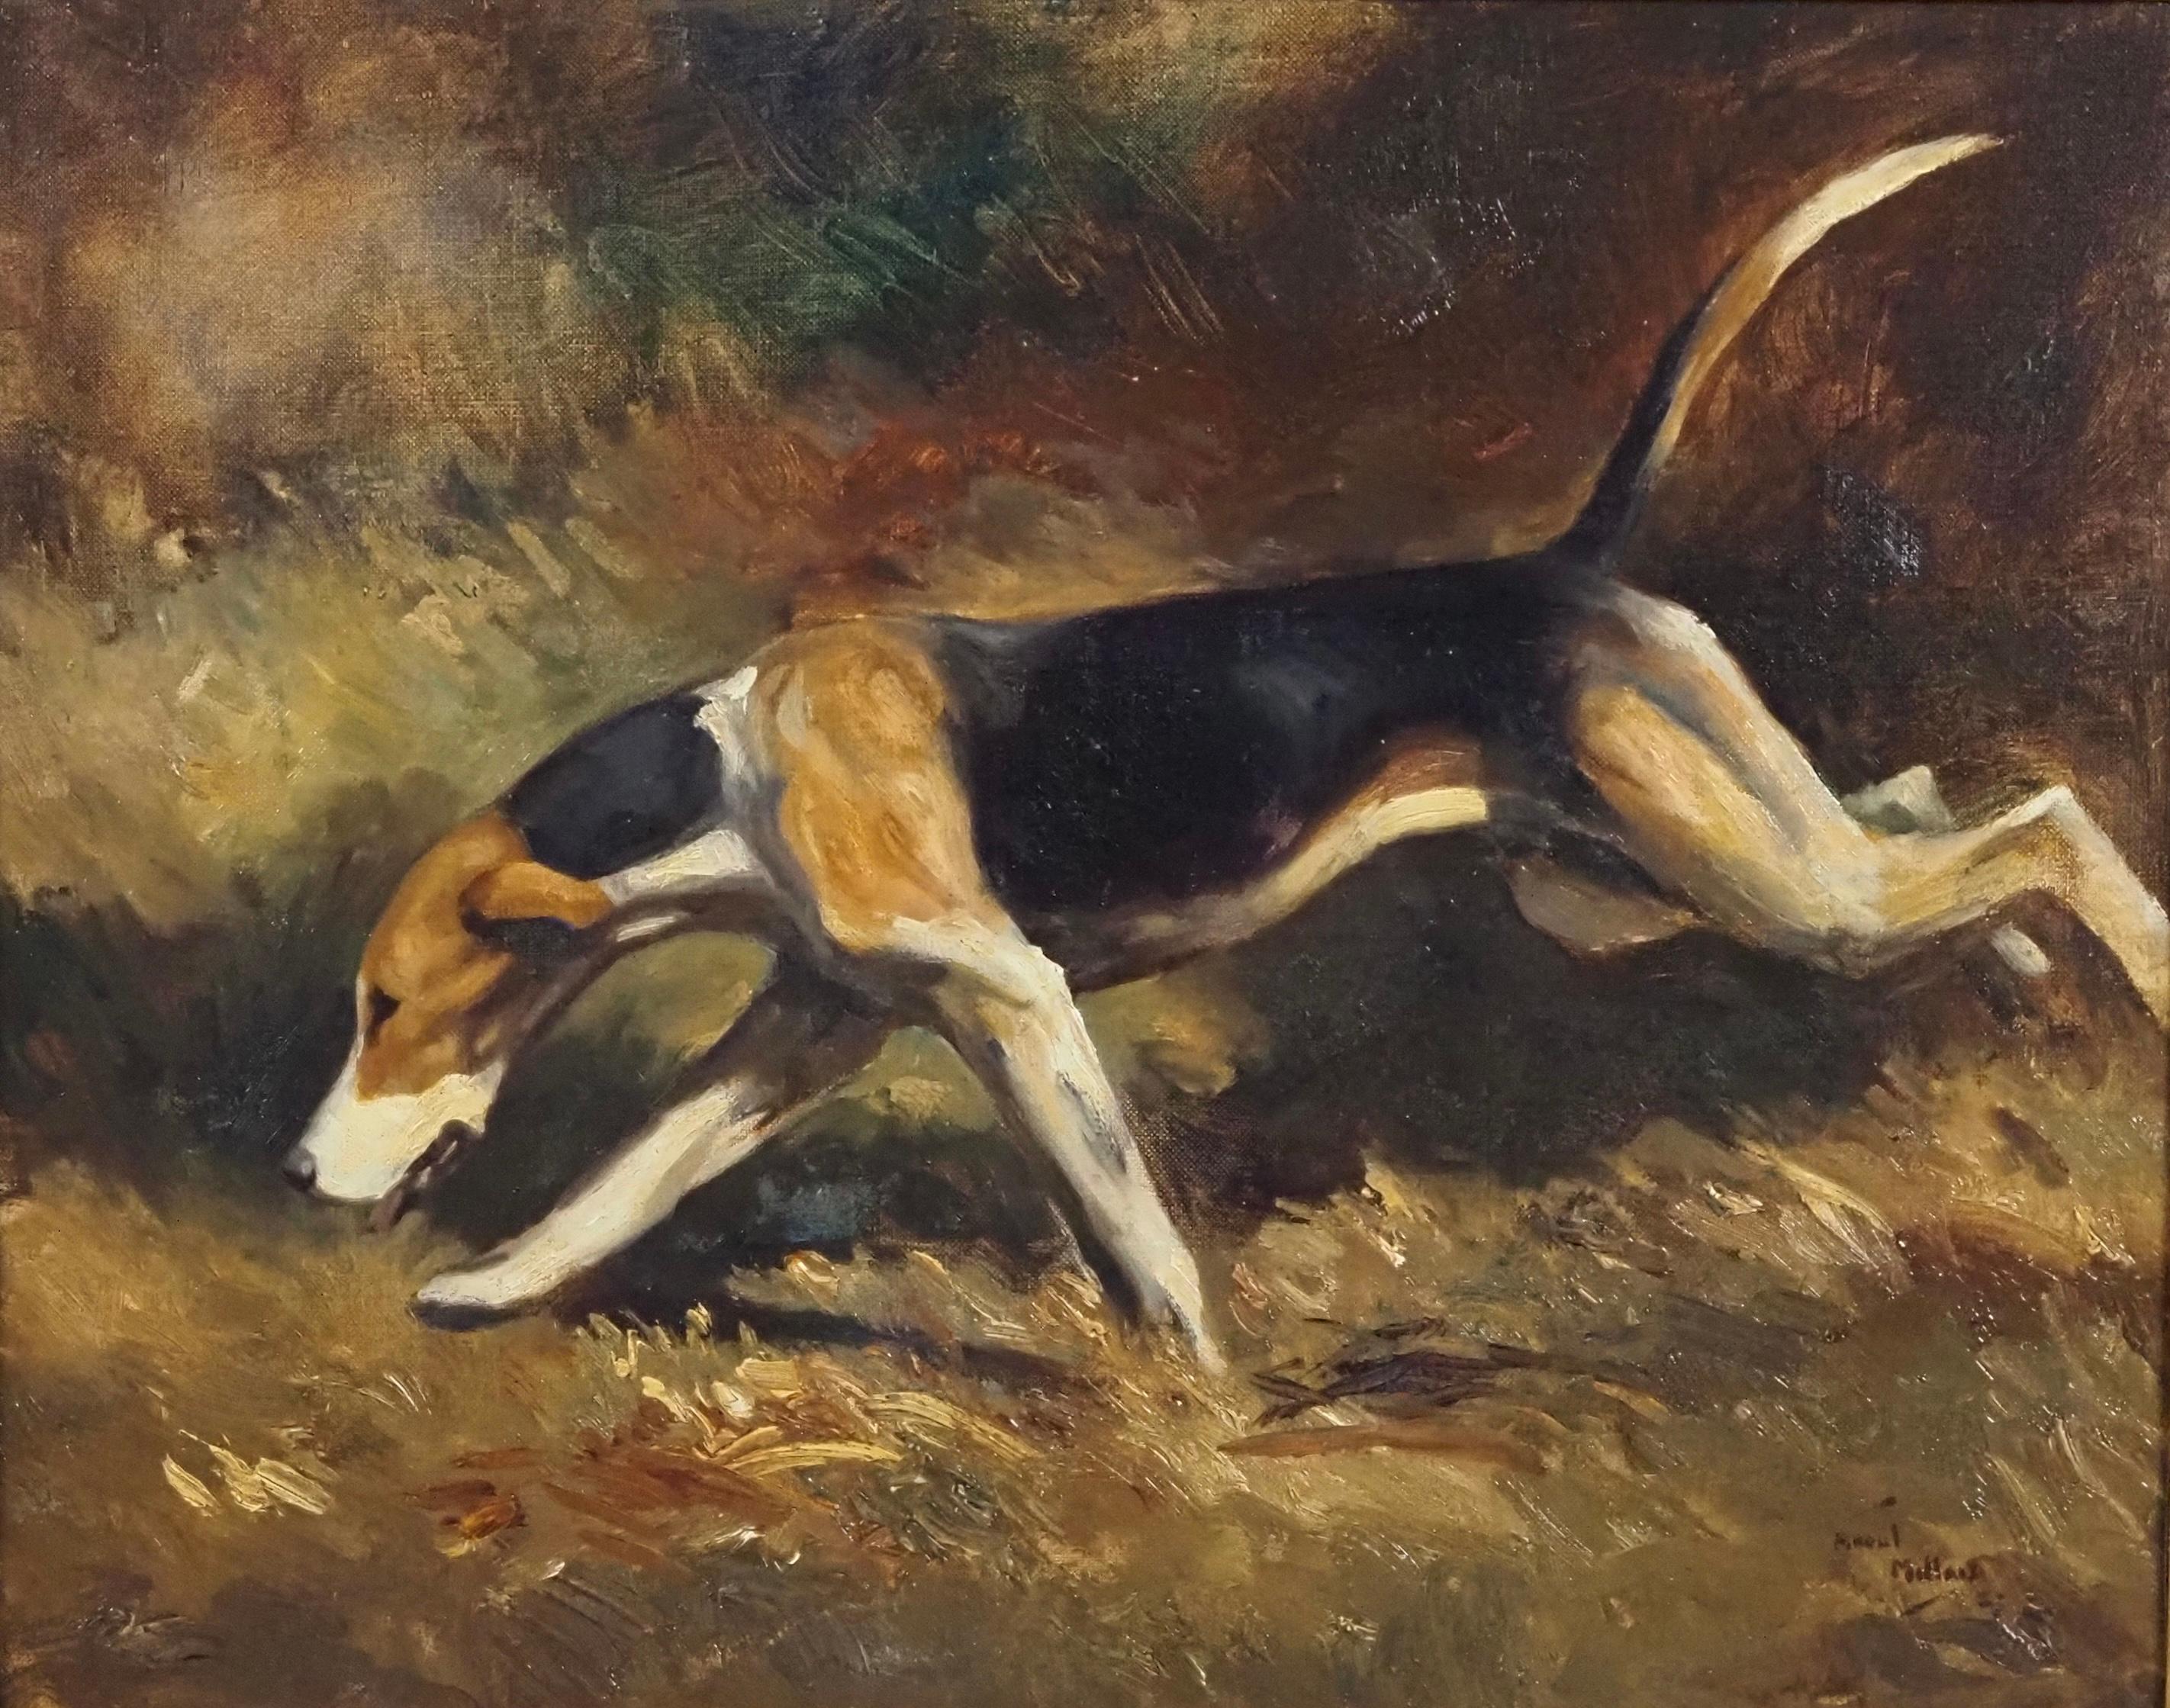 A Hound running in a landscape - Painting by Raoul Millais